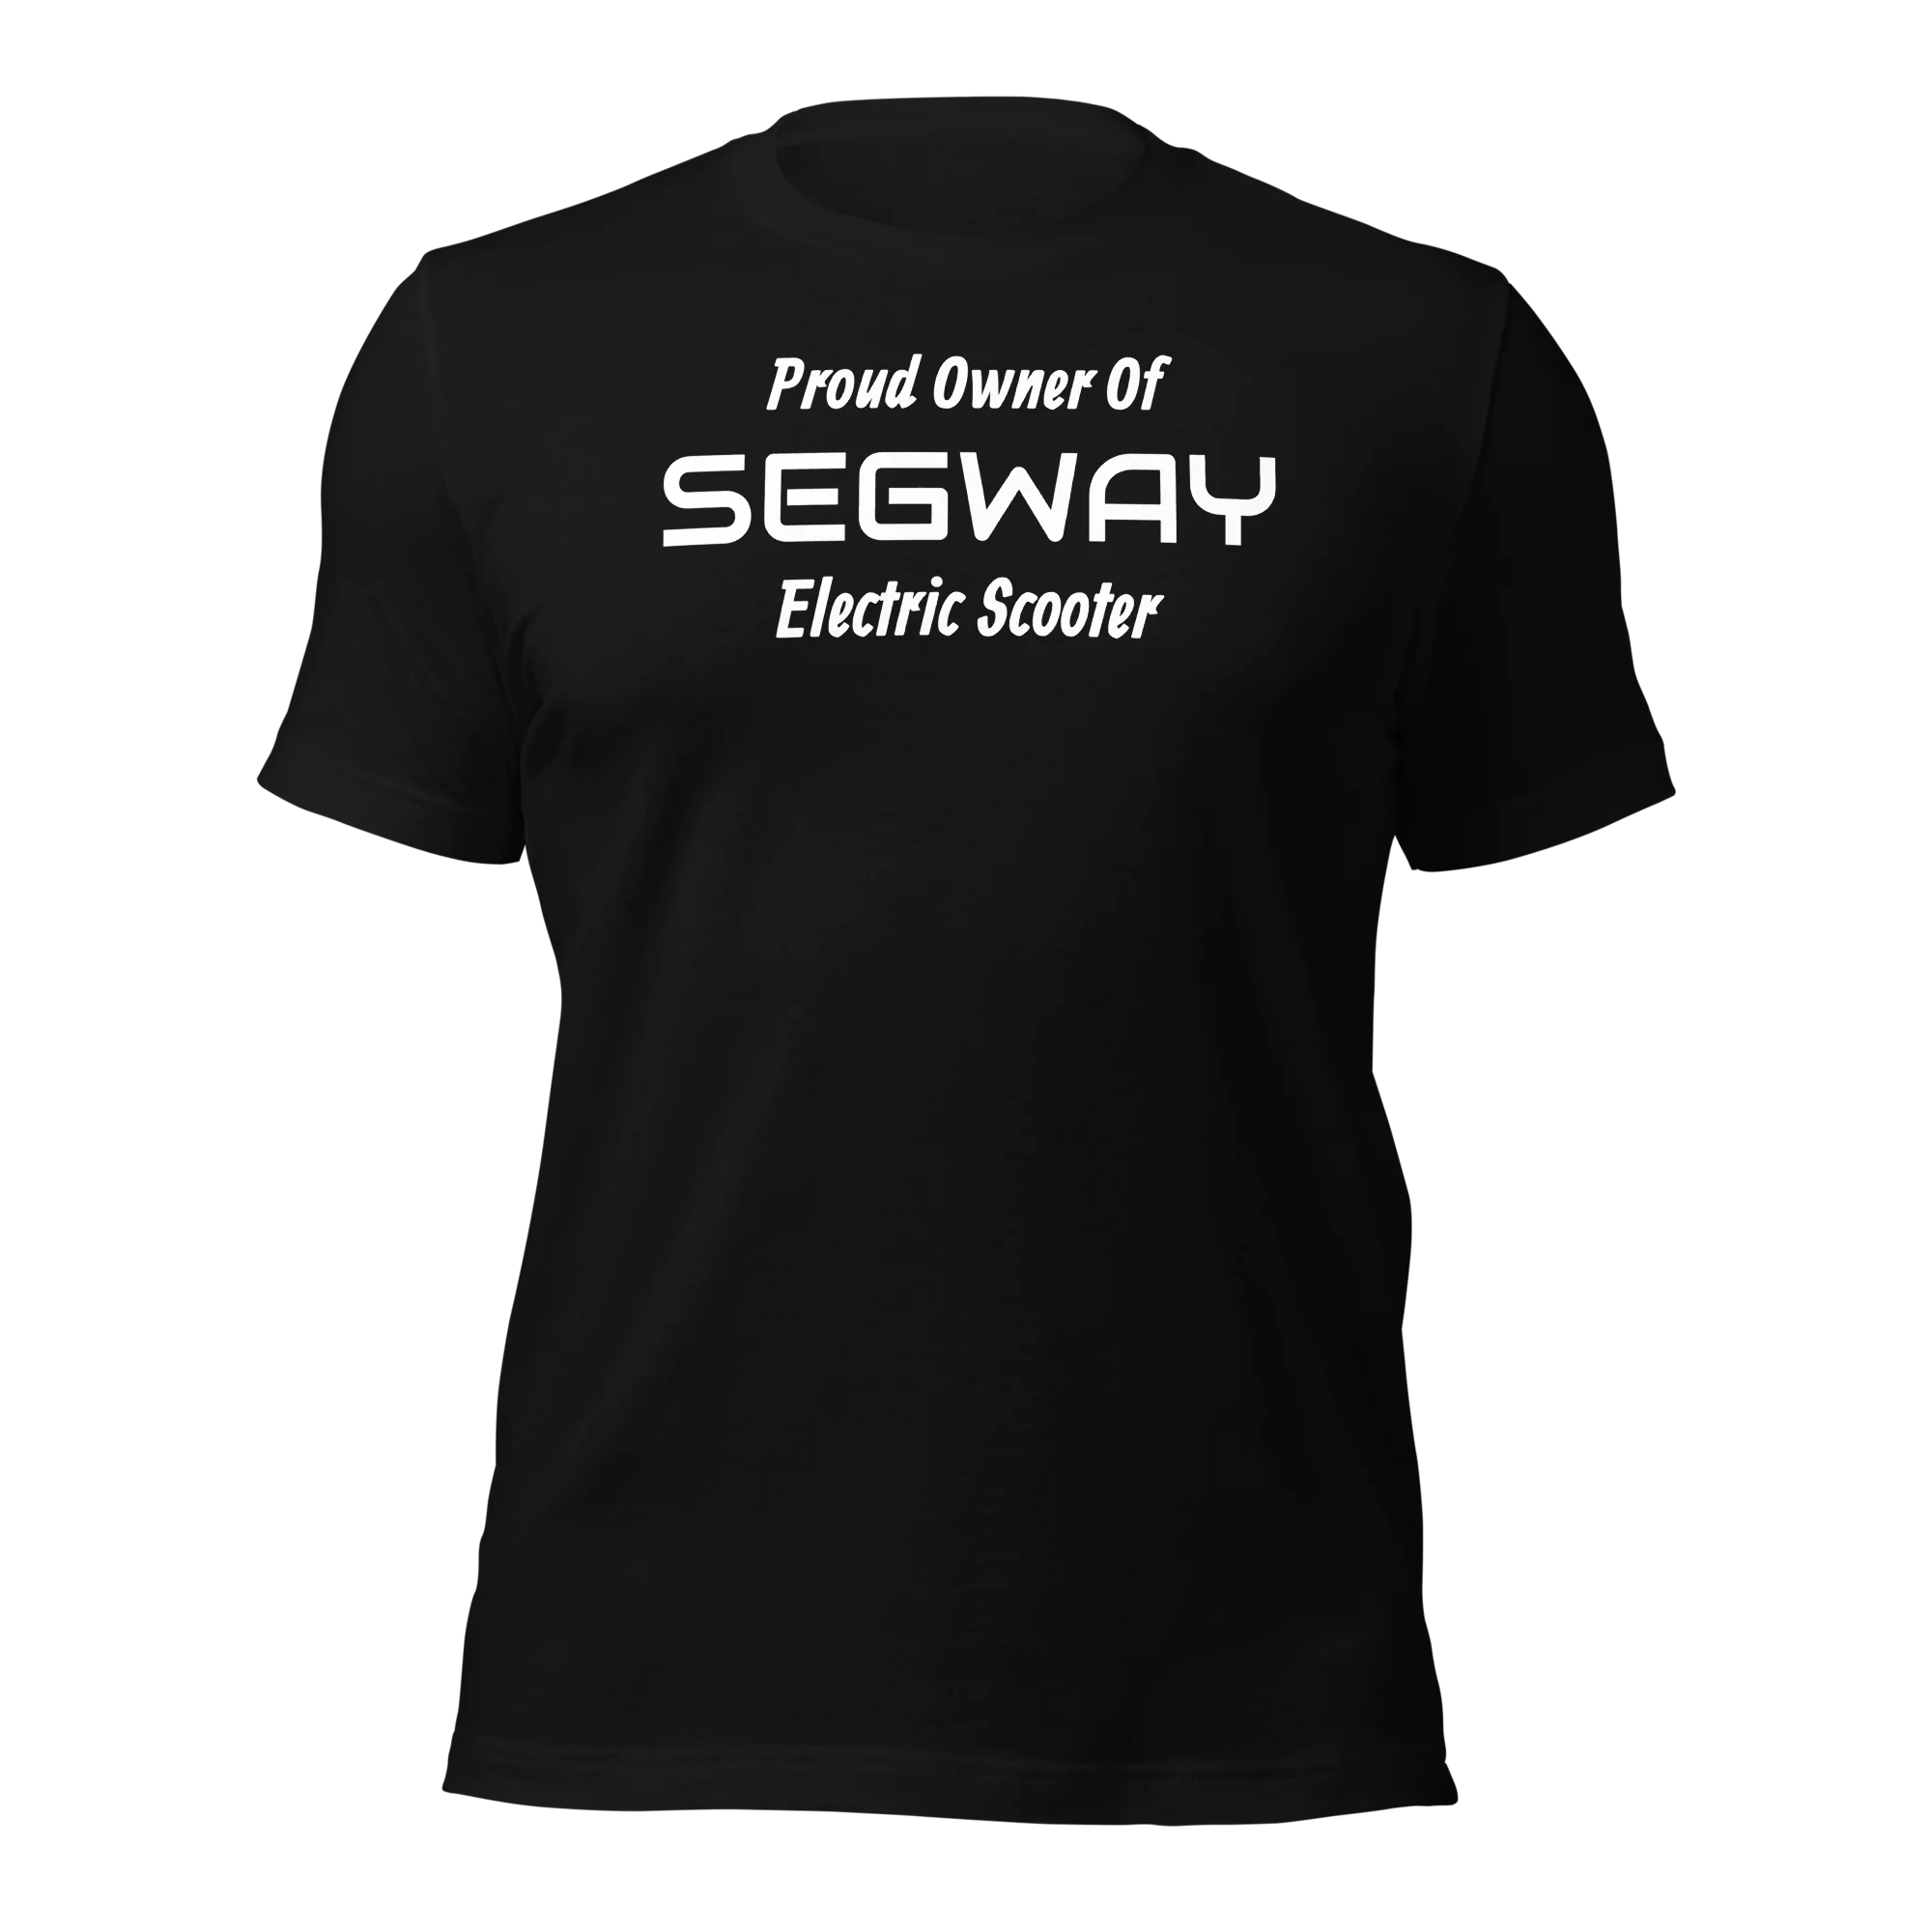 Funny T-Shirt: Proud Owner Of SEGWAY E-Scooter (Black)